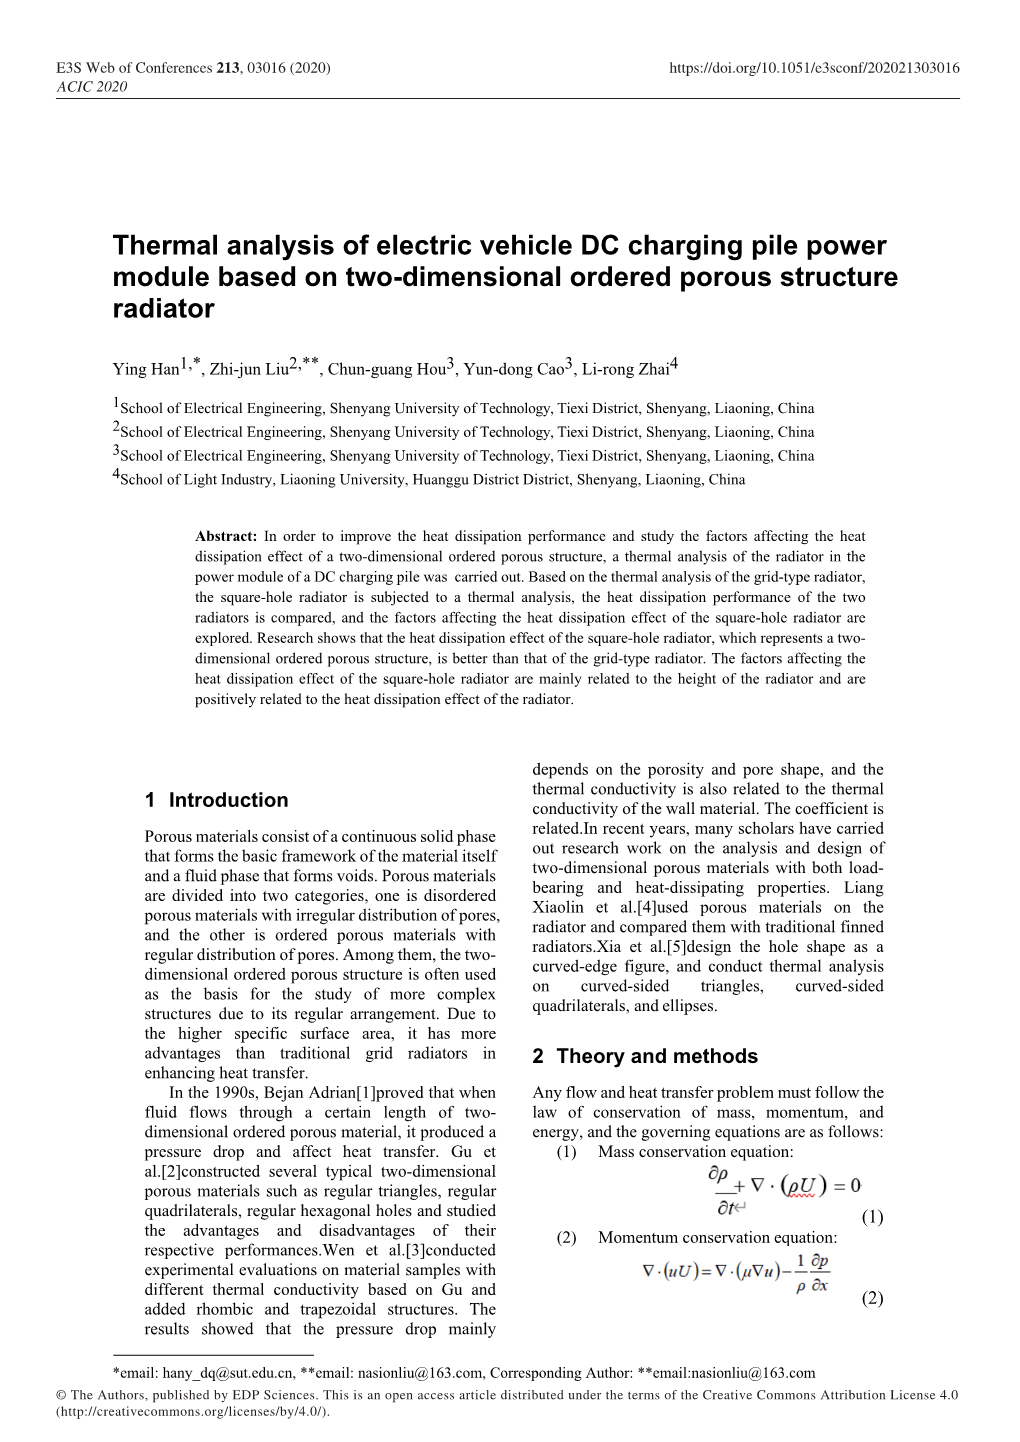 Thermal Analysis of Electric Vehicle DC Charging Pile Power Module Based on Two-Dimensional Ordered Porous Structure Radiator